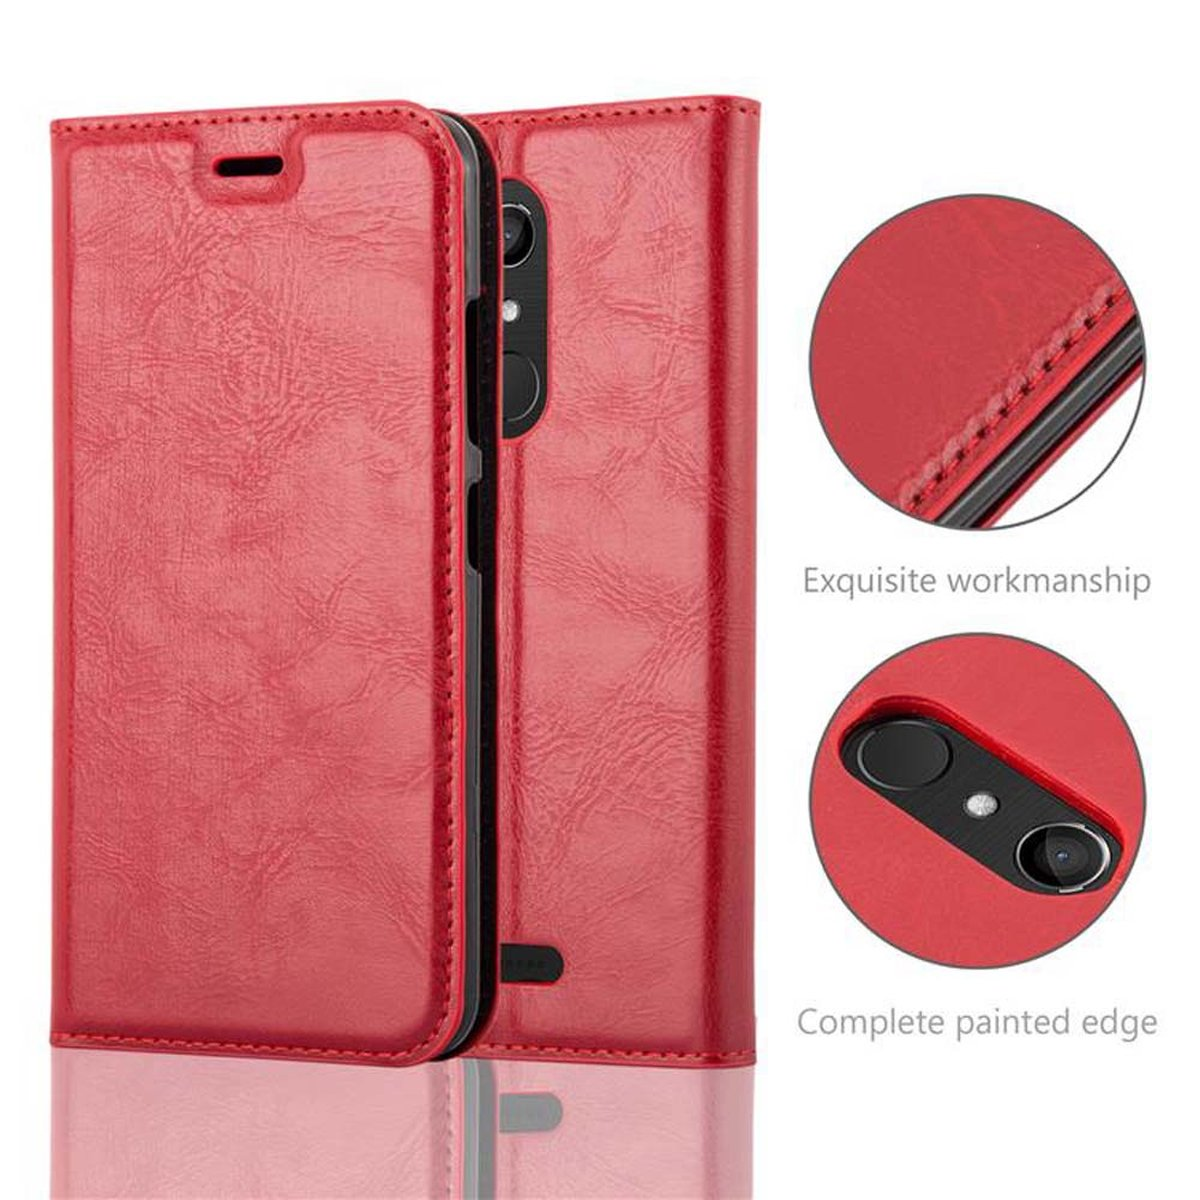 APFEL Invisible UPULSE Hülle Bookcover, LITE, WIKO, ROT Book CADORABO Magnet,